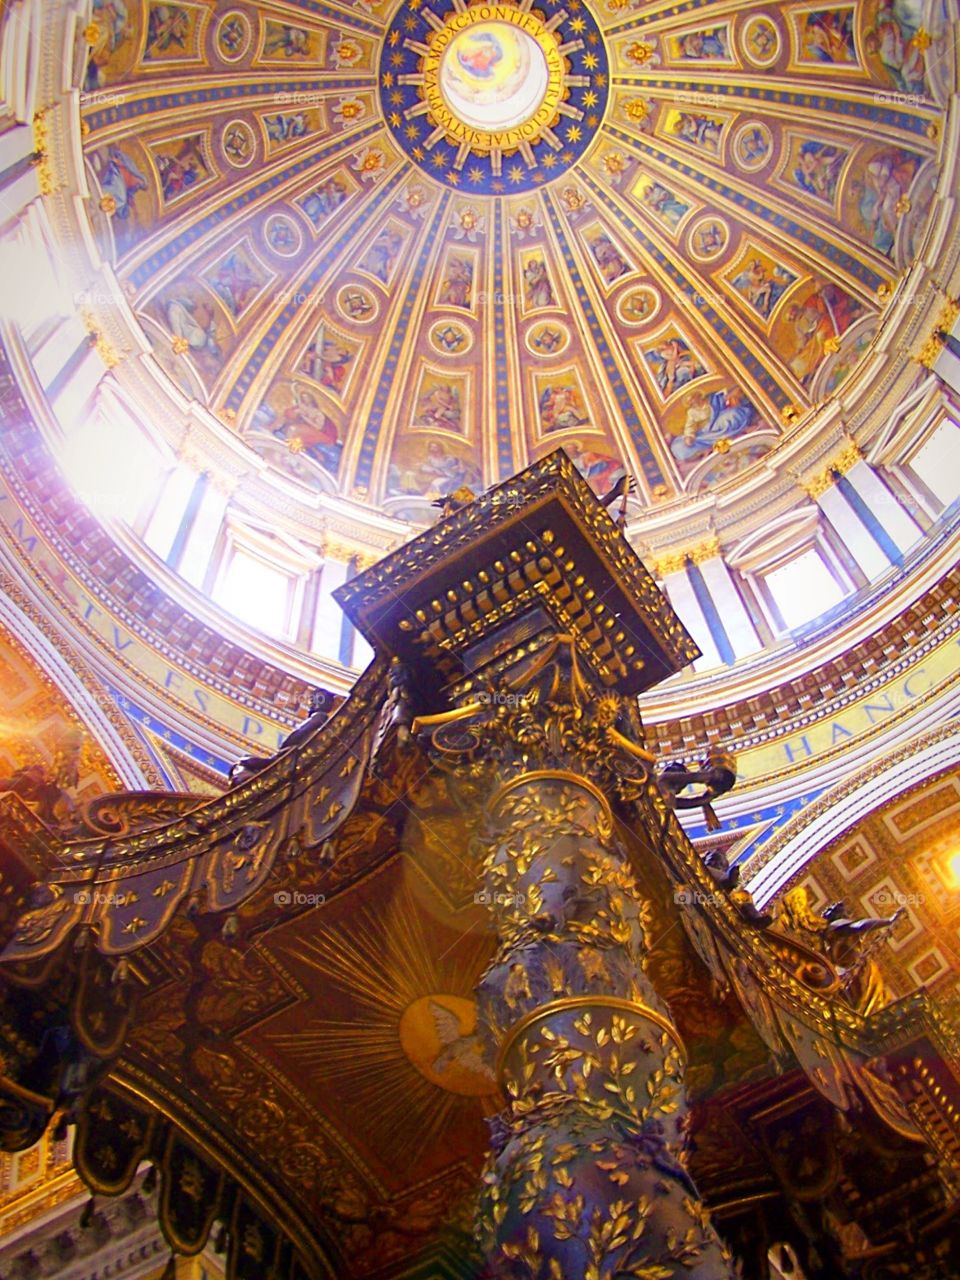 Altar of St. Peter’s Basilica in the Vatican City in Rome Italy